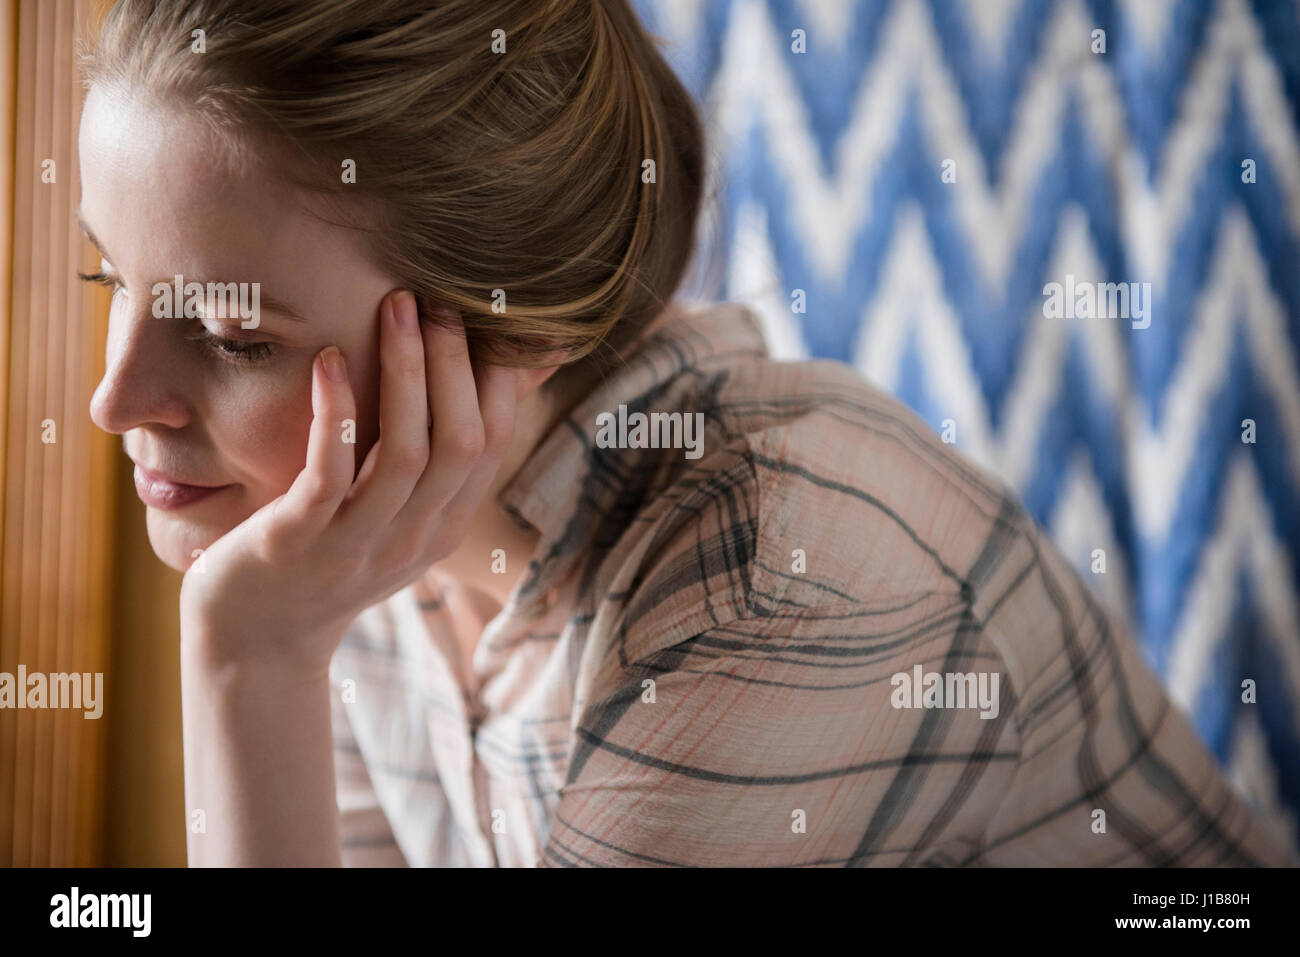 Pensive woman with hand on chin Stock Photo